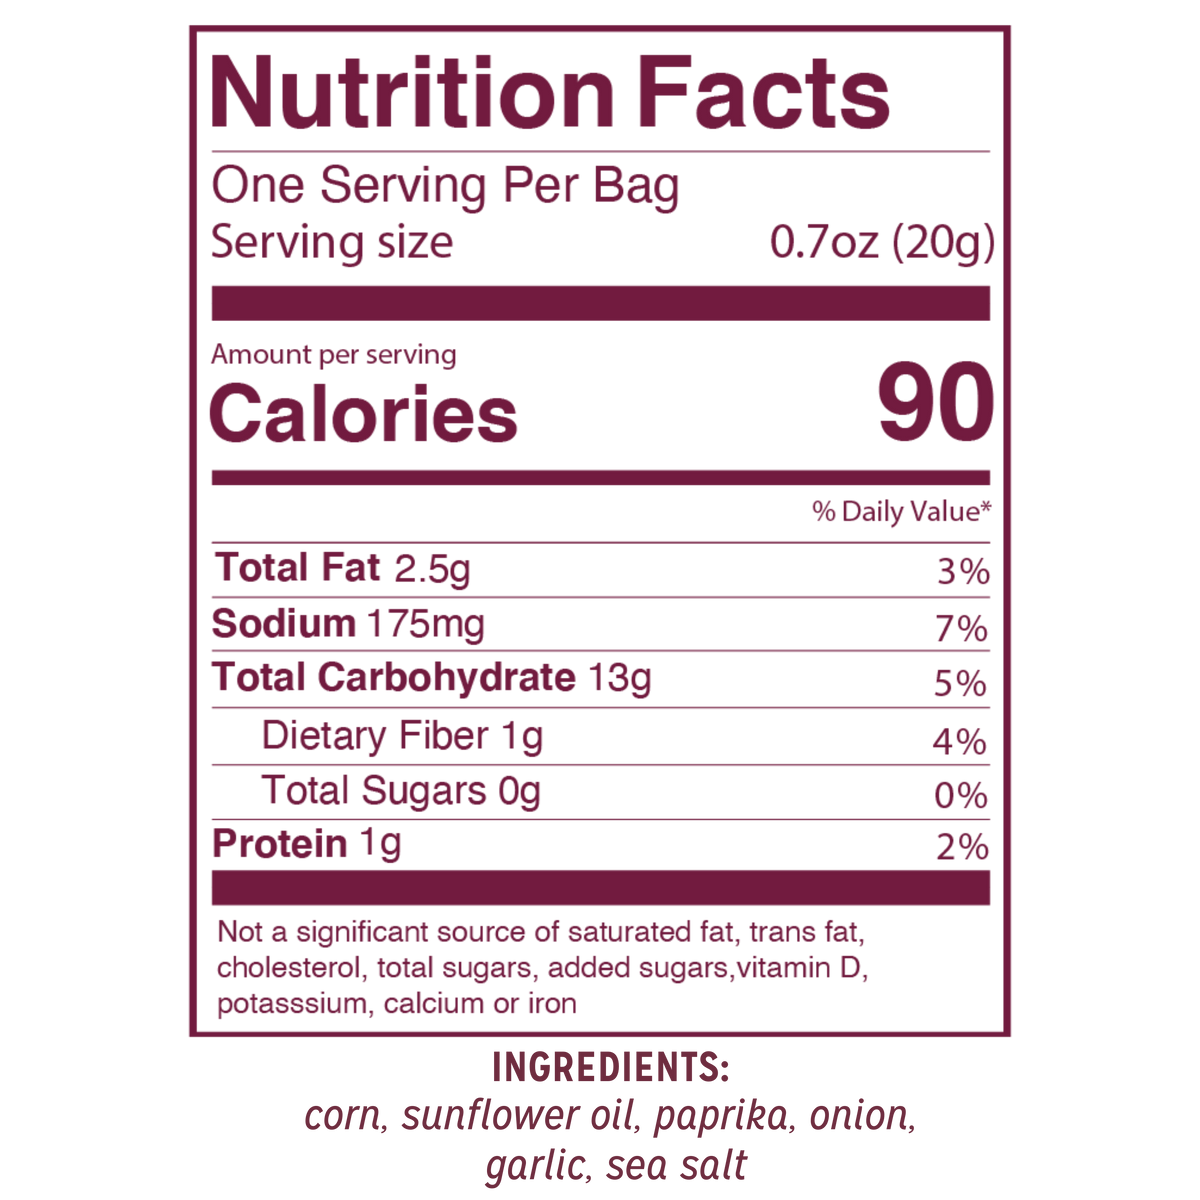 Smoked BBQ Nutrition Facts